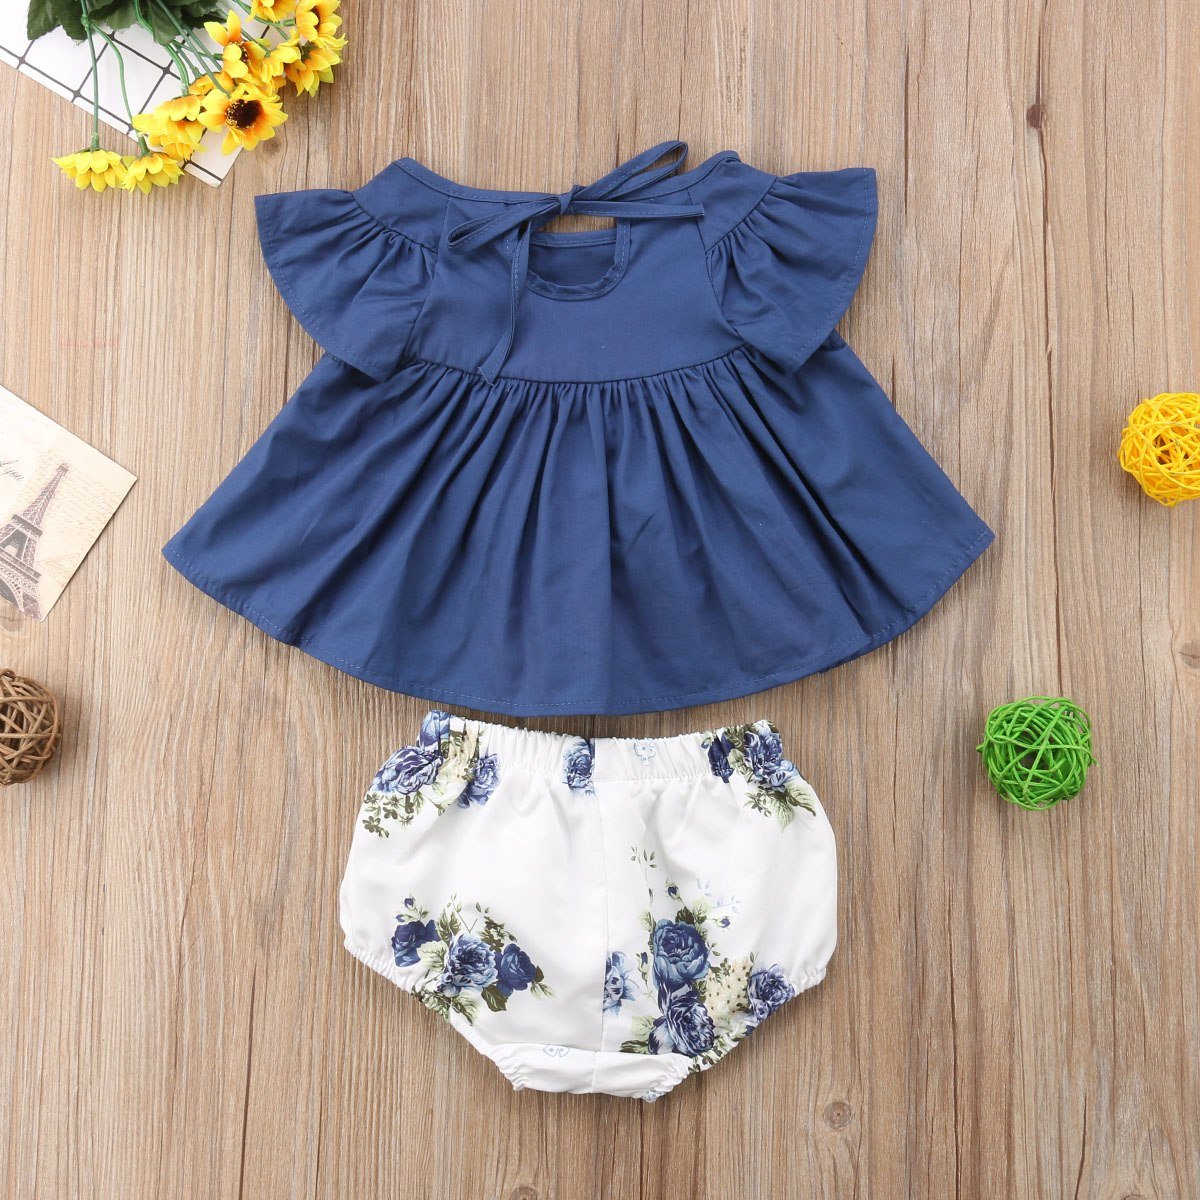 Dress and bloomers ser - Adorable Attire